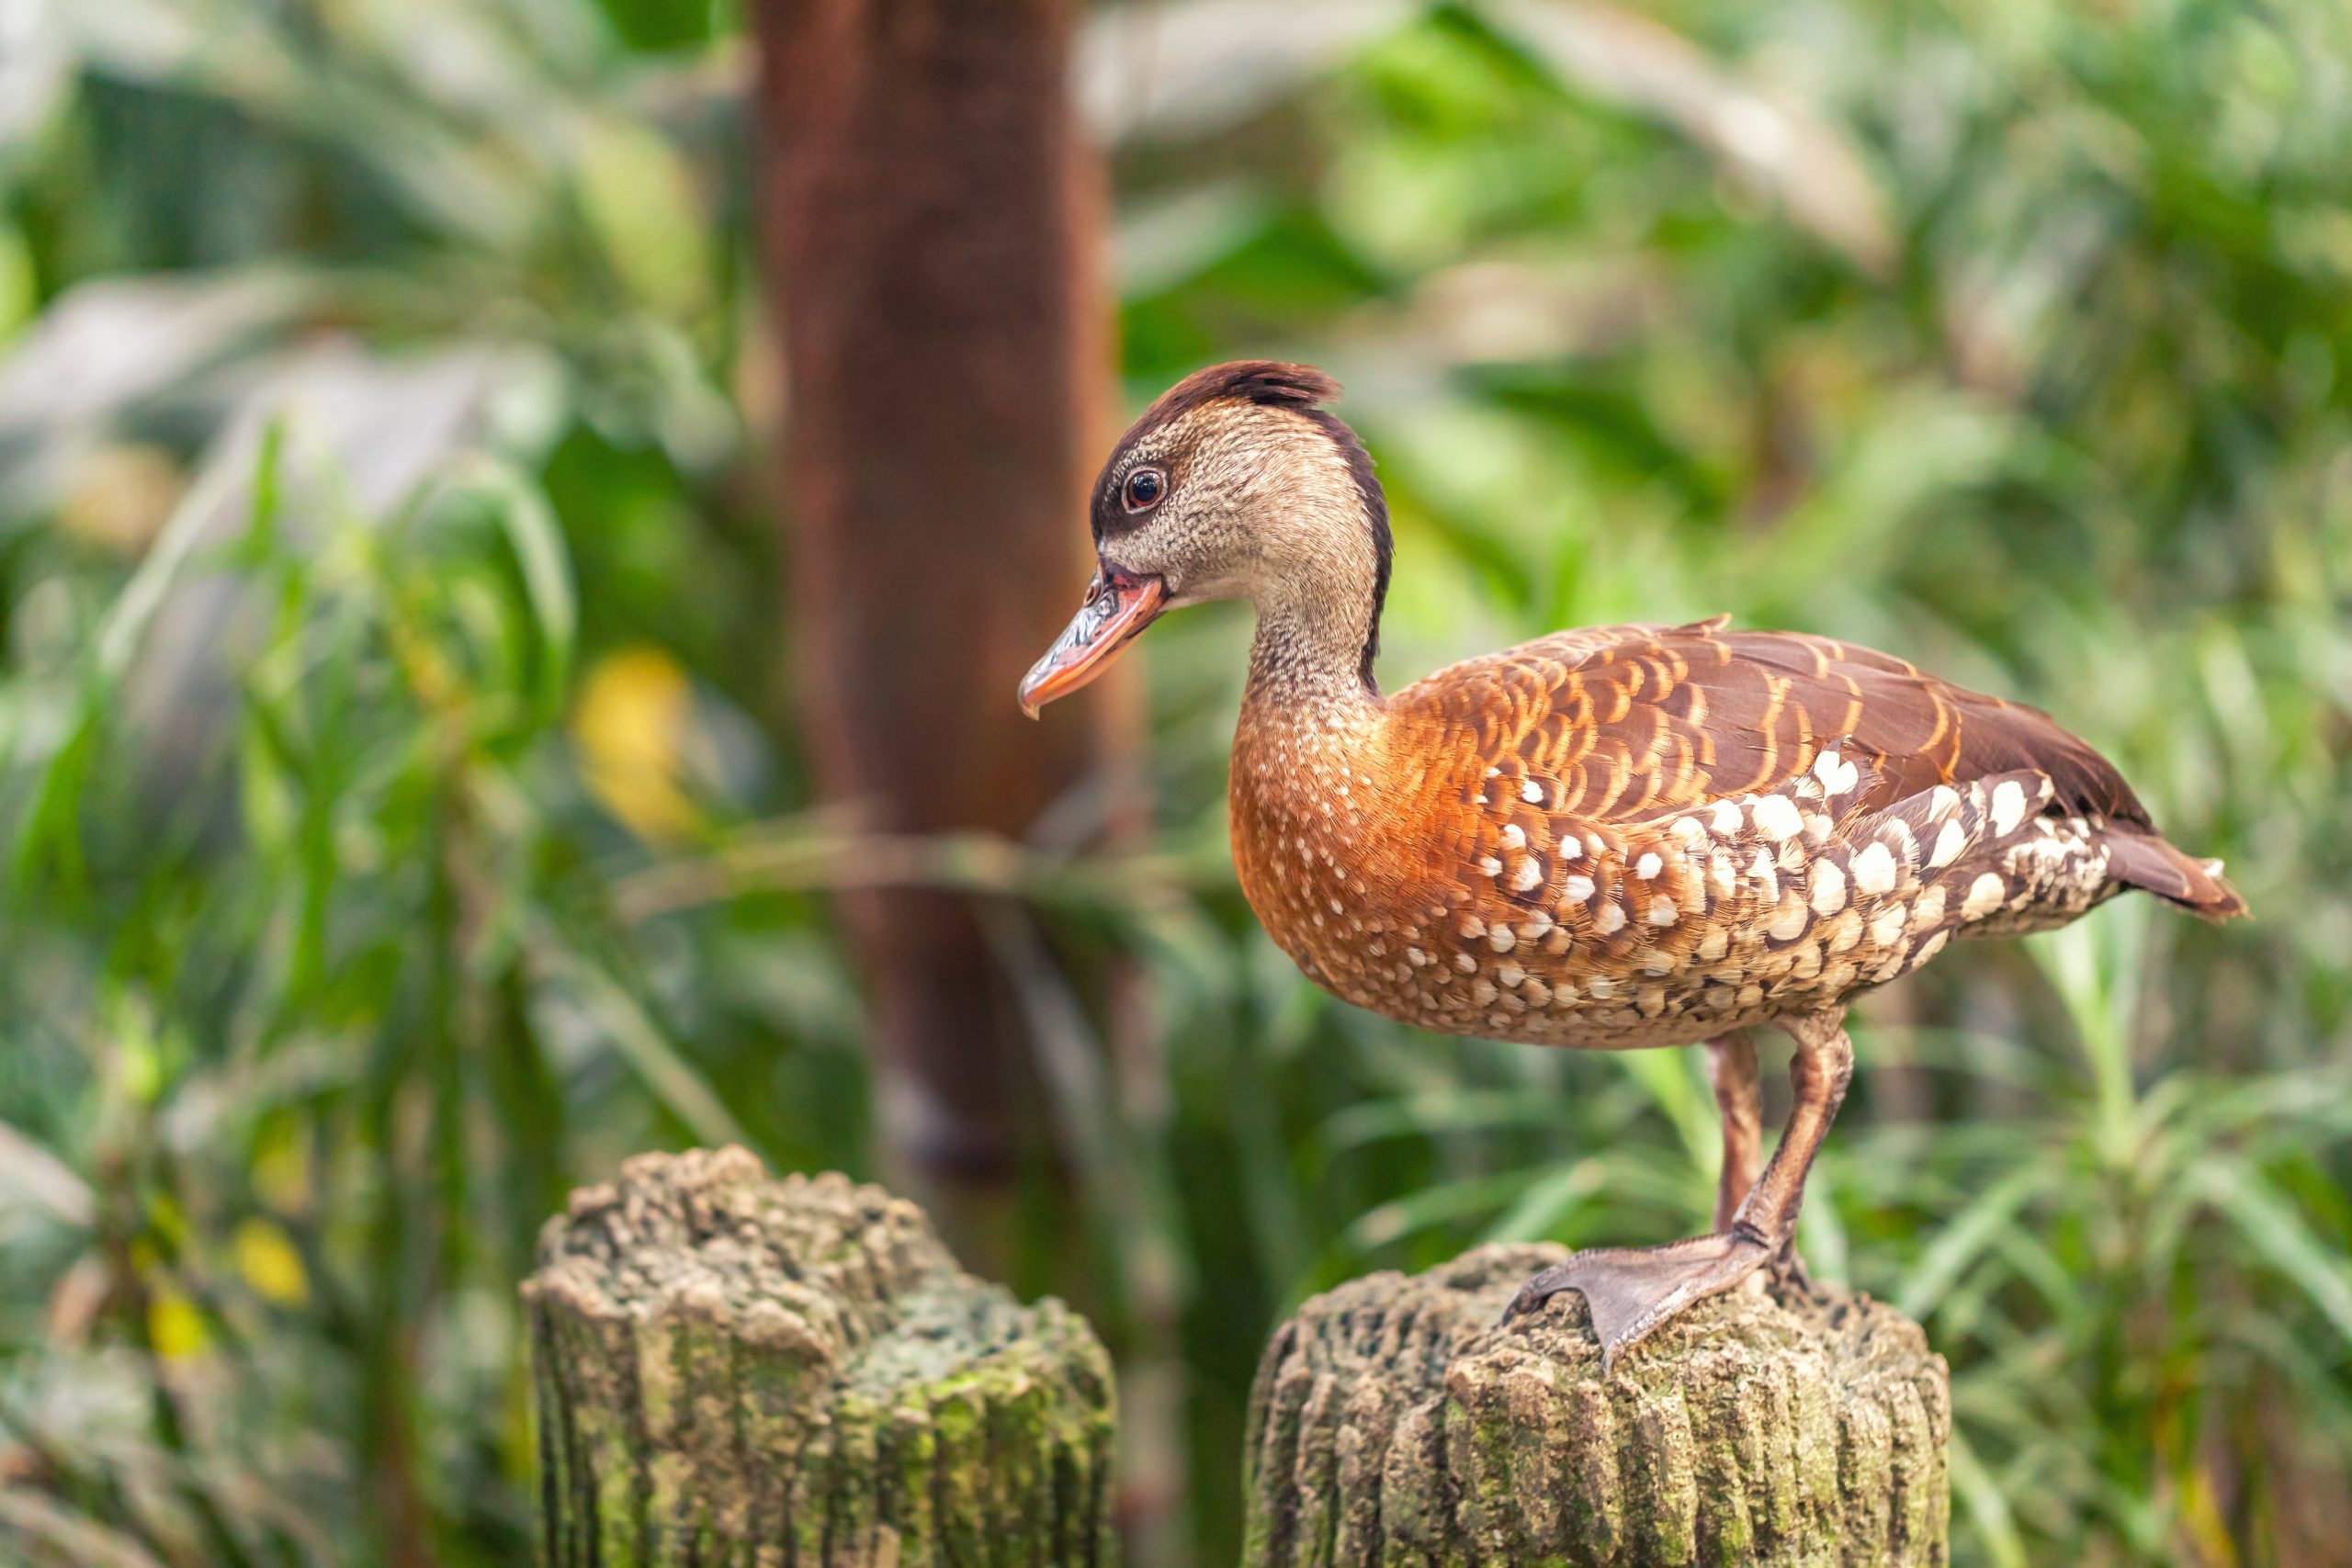 Spotted Whistling-duck standing on a wooden stump